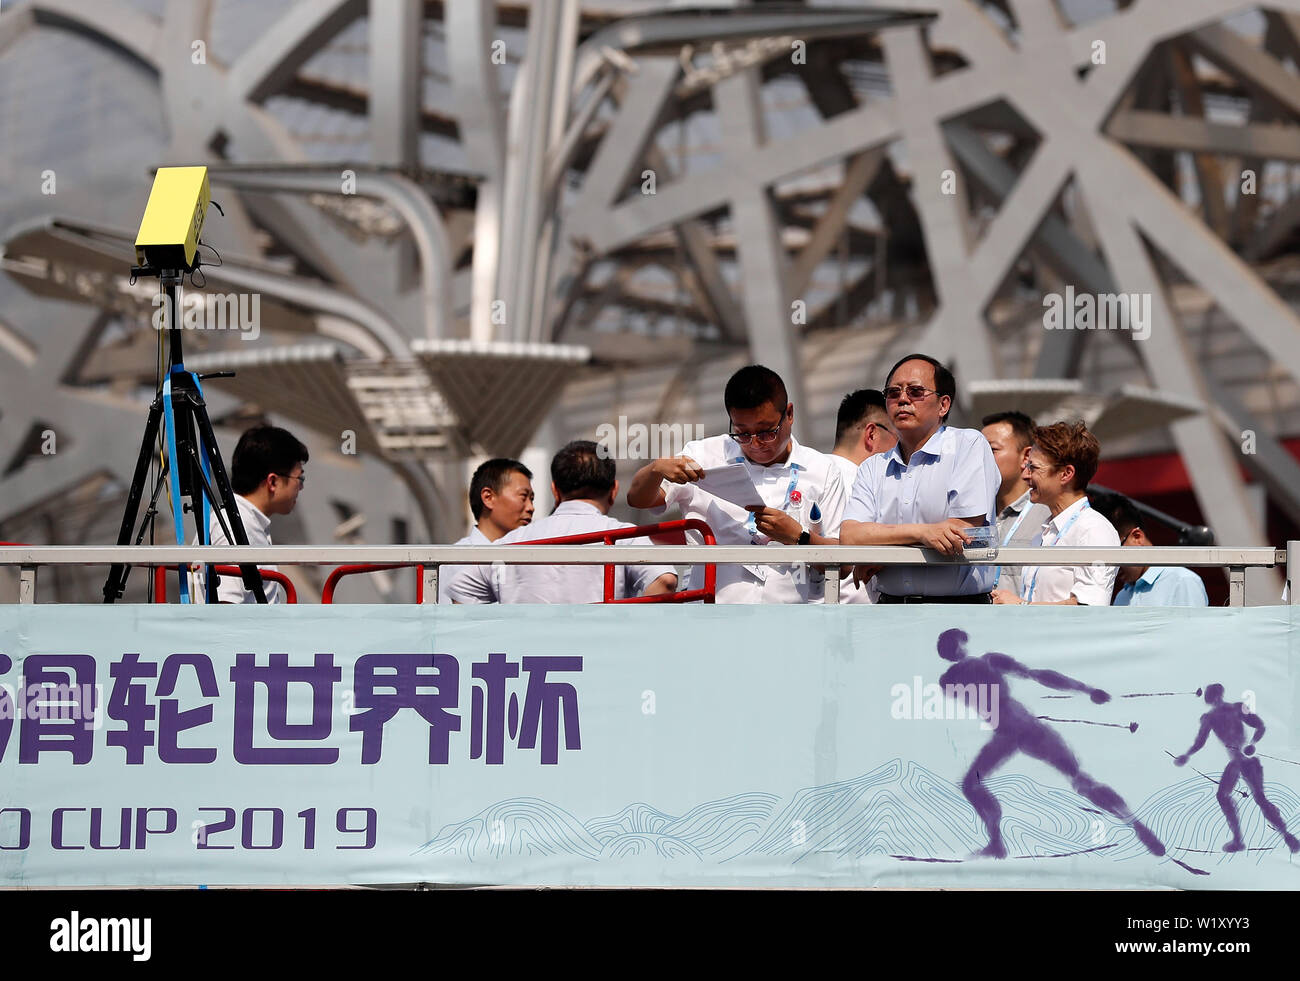 Beijing, China. 4th July, 2019. Gou Zhongwen, director of China's General Administration of Sport, watches the race during Day 1 2019 FIS China Beijing Roller Ski World Cup in Beijing, China, on July 4, 2019. Credit: Wang Lili/Xinhua/Alamy Live News Stock Photo